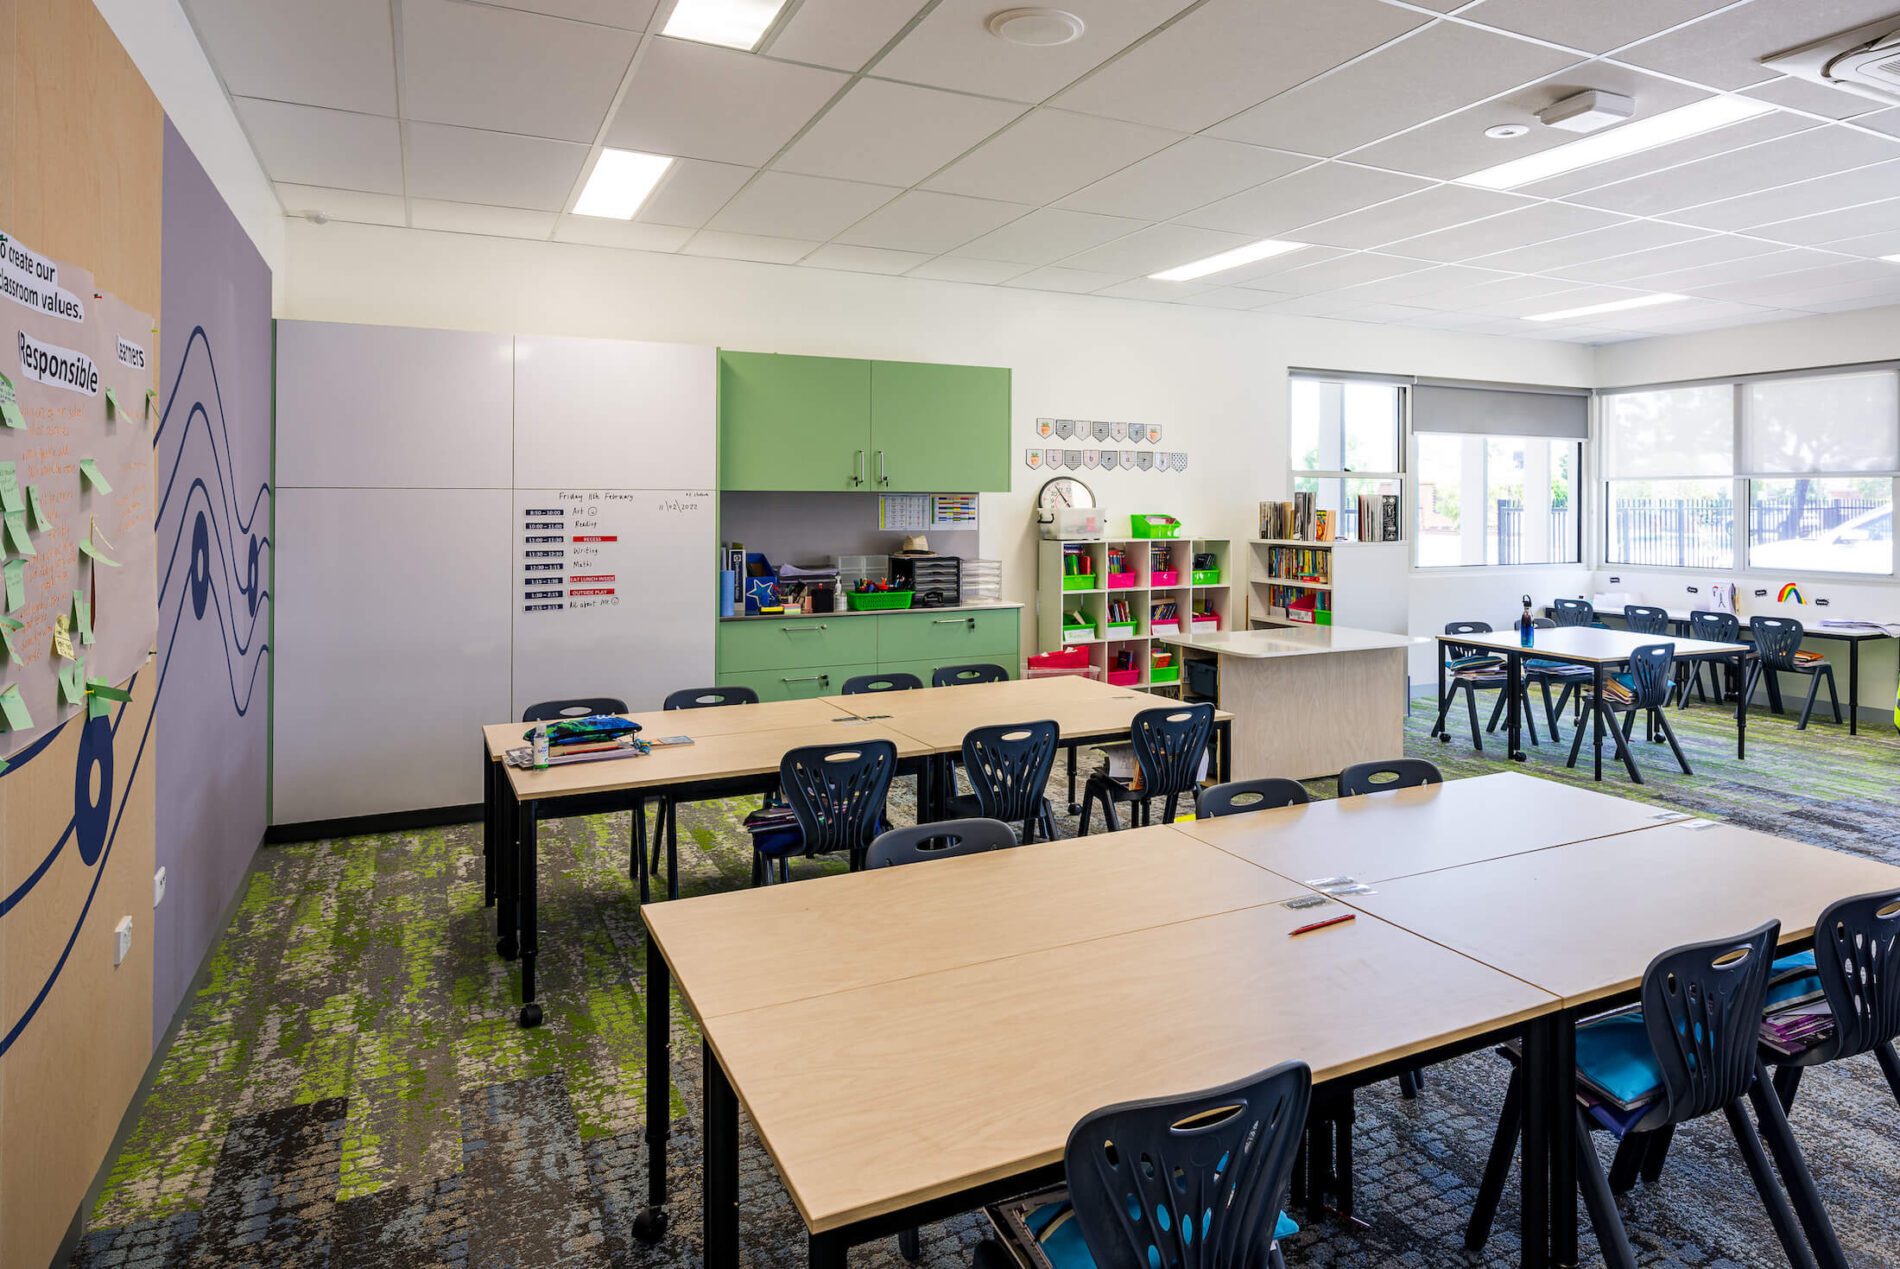 General learning area with colourful laminate storage, tables and chairs